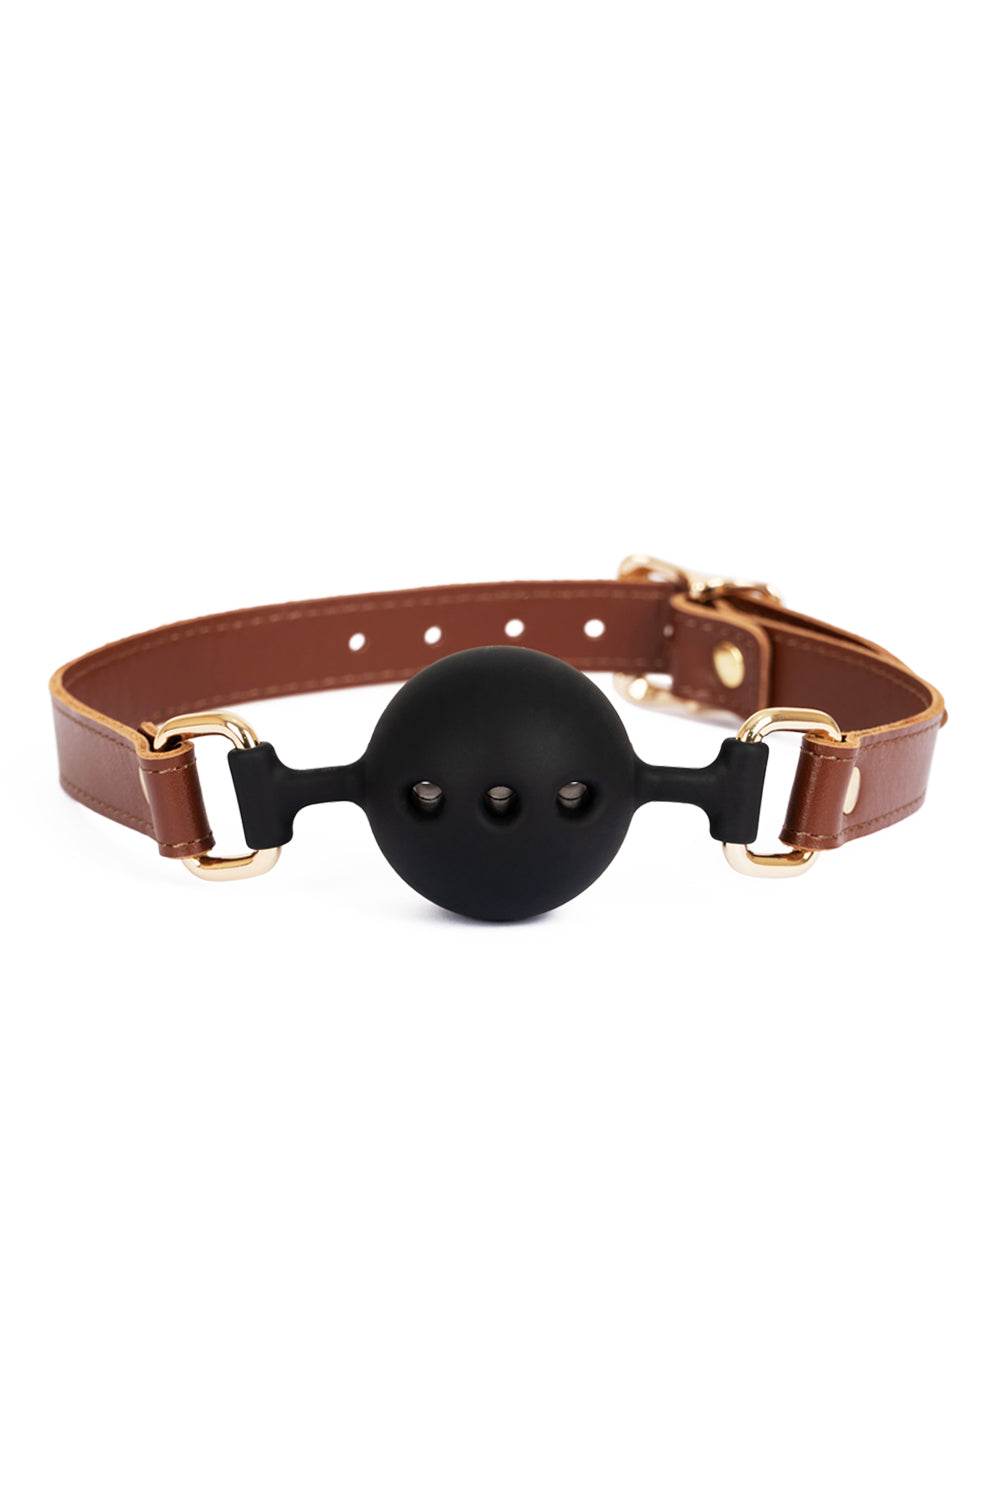 Soft Silicone Mouth Ball Gag. Brown